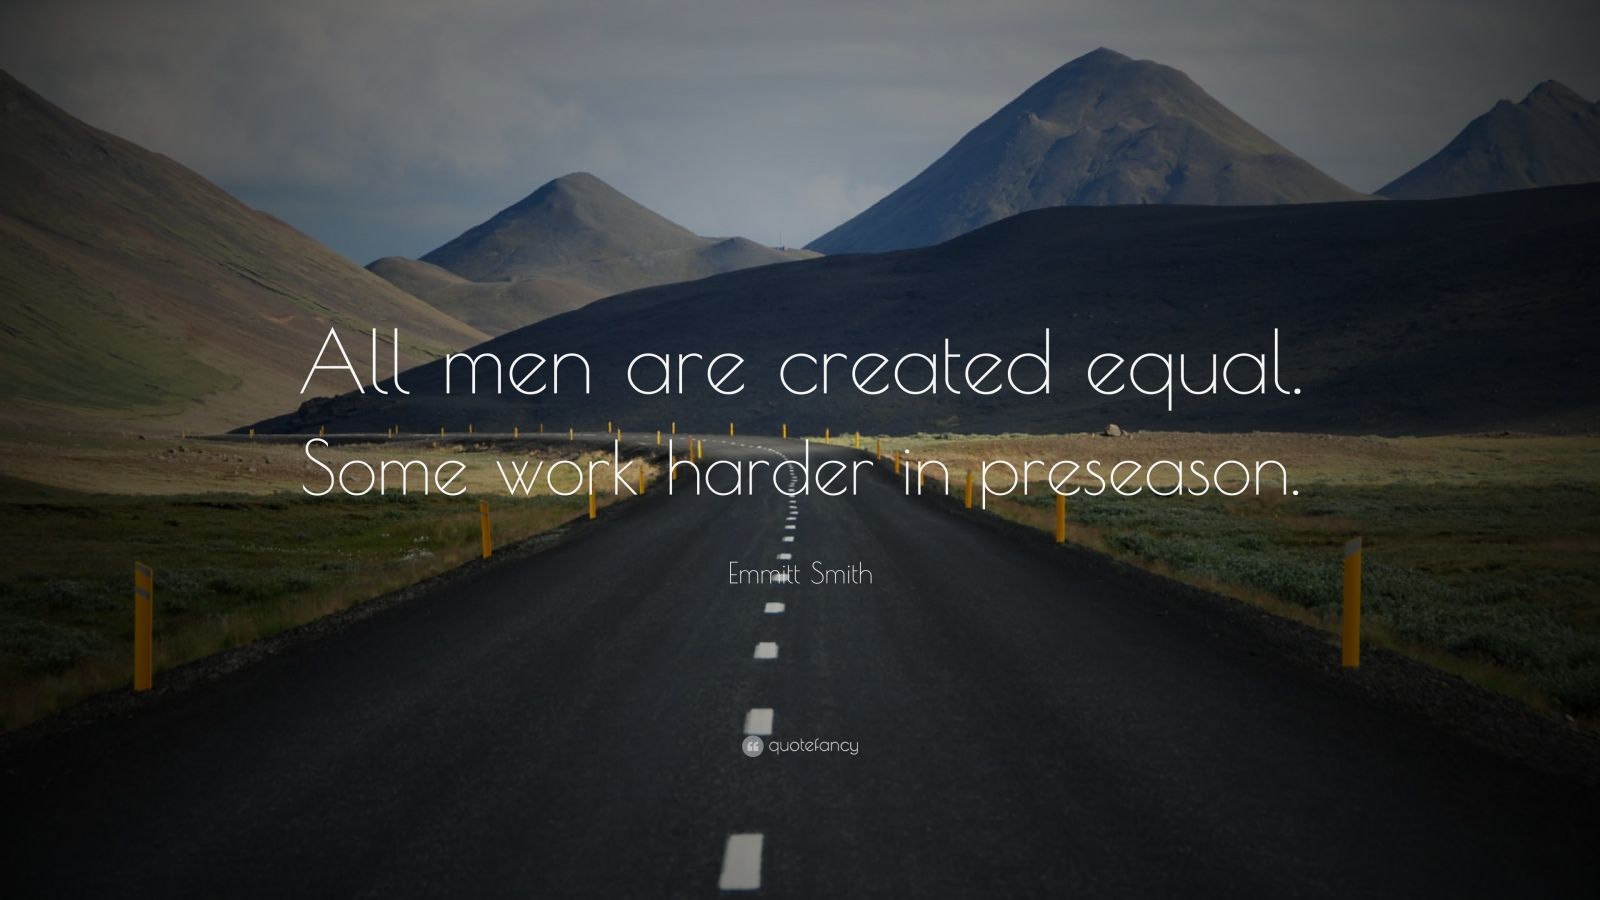 Top 40 Hard Work Quotes | 2021 Edition | Free Images - QuoteFancy